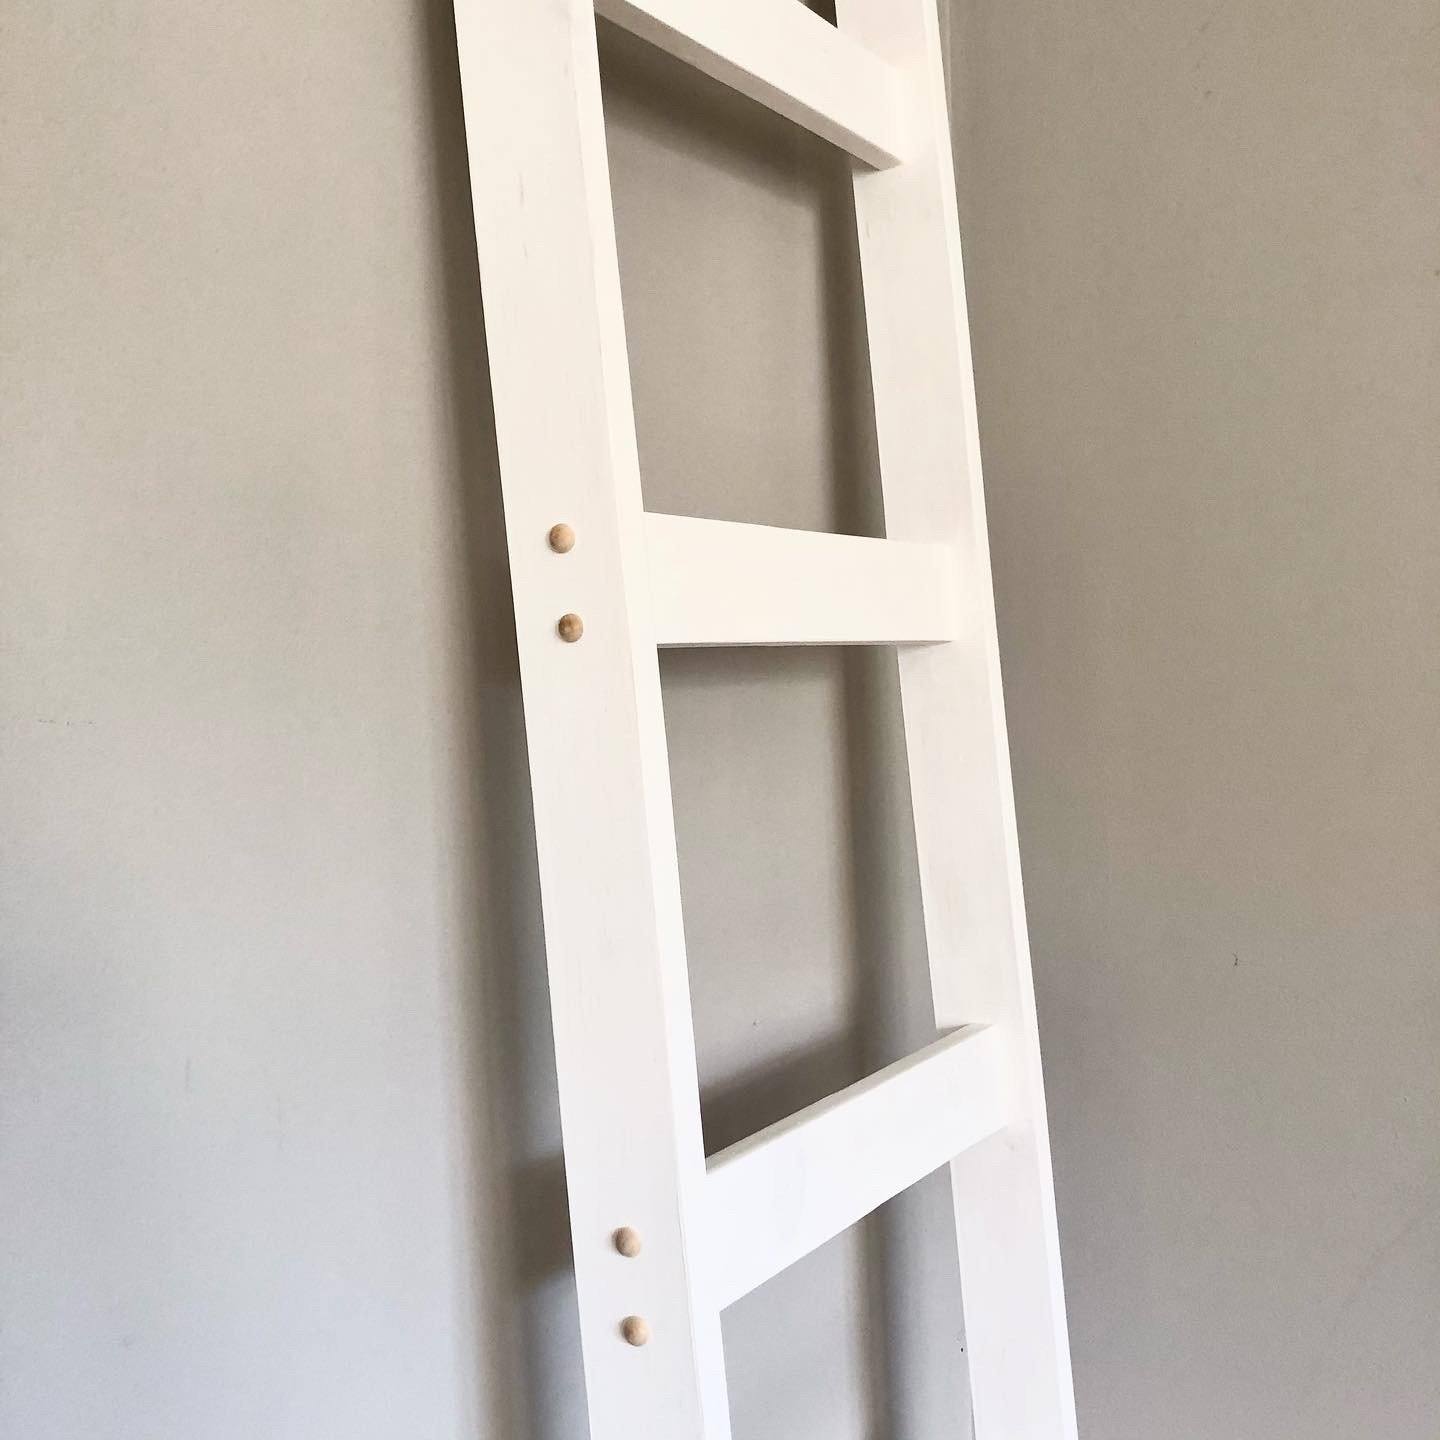 6ft Blanket Ladder in WHITE-WASH Project Pine Designs Natural (Shown) 